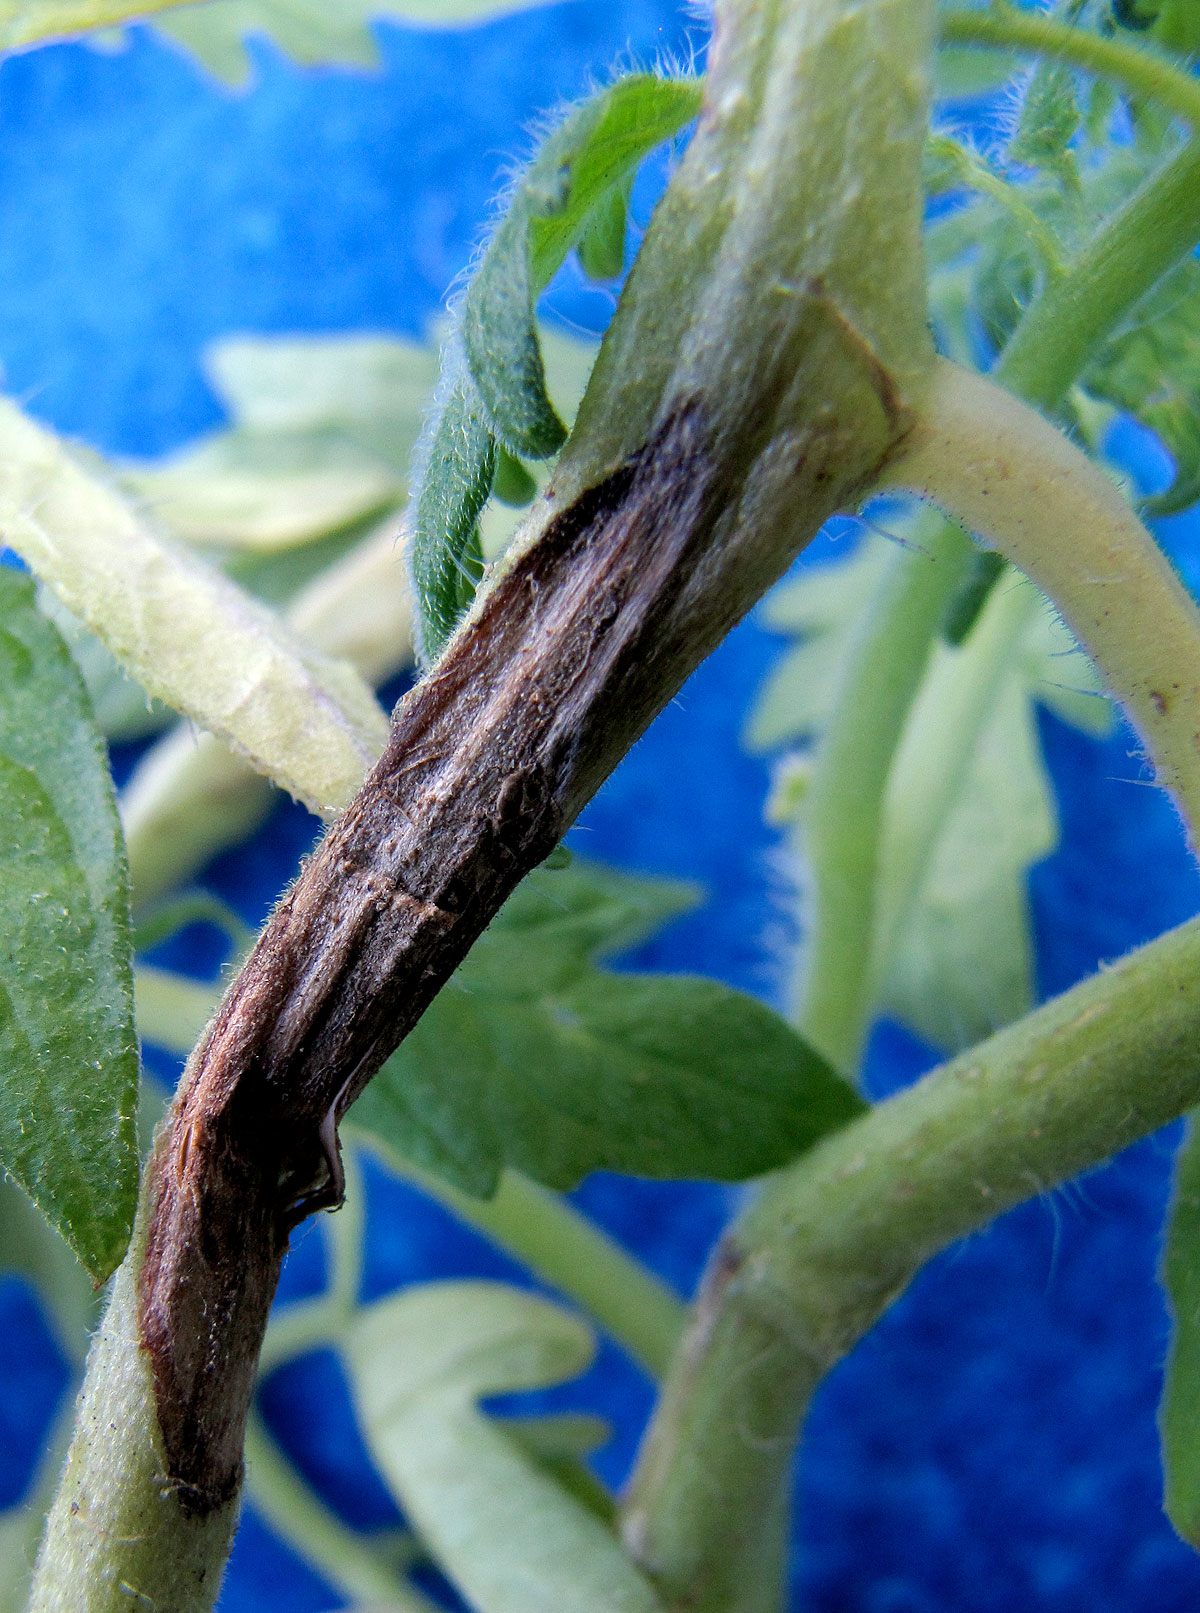 Gray mold on tomatoes | Vegetable Pathology – Long Island Horticultural